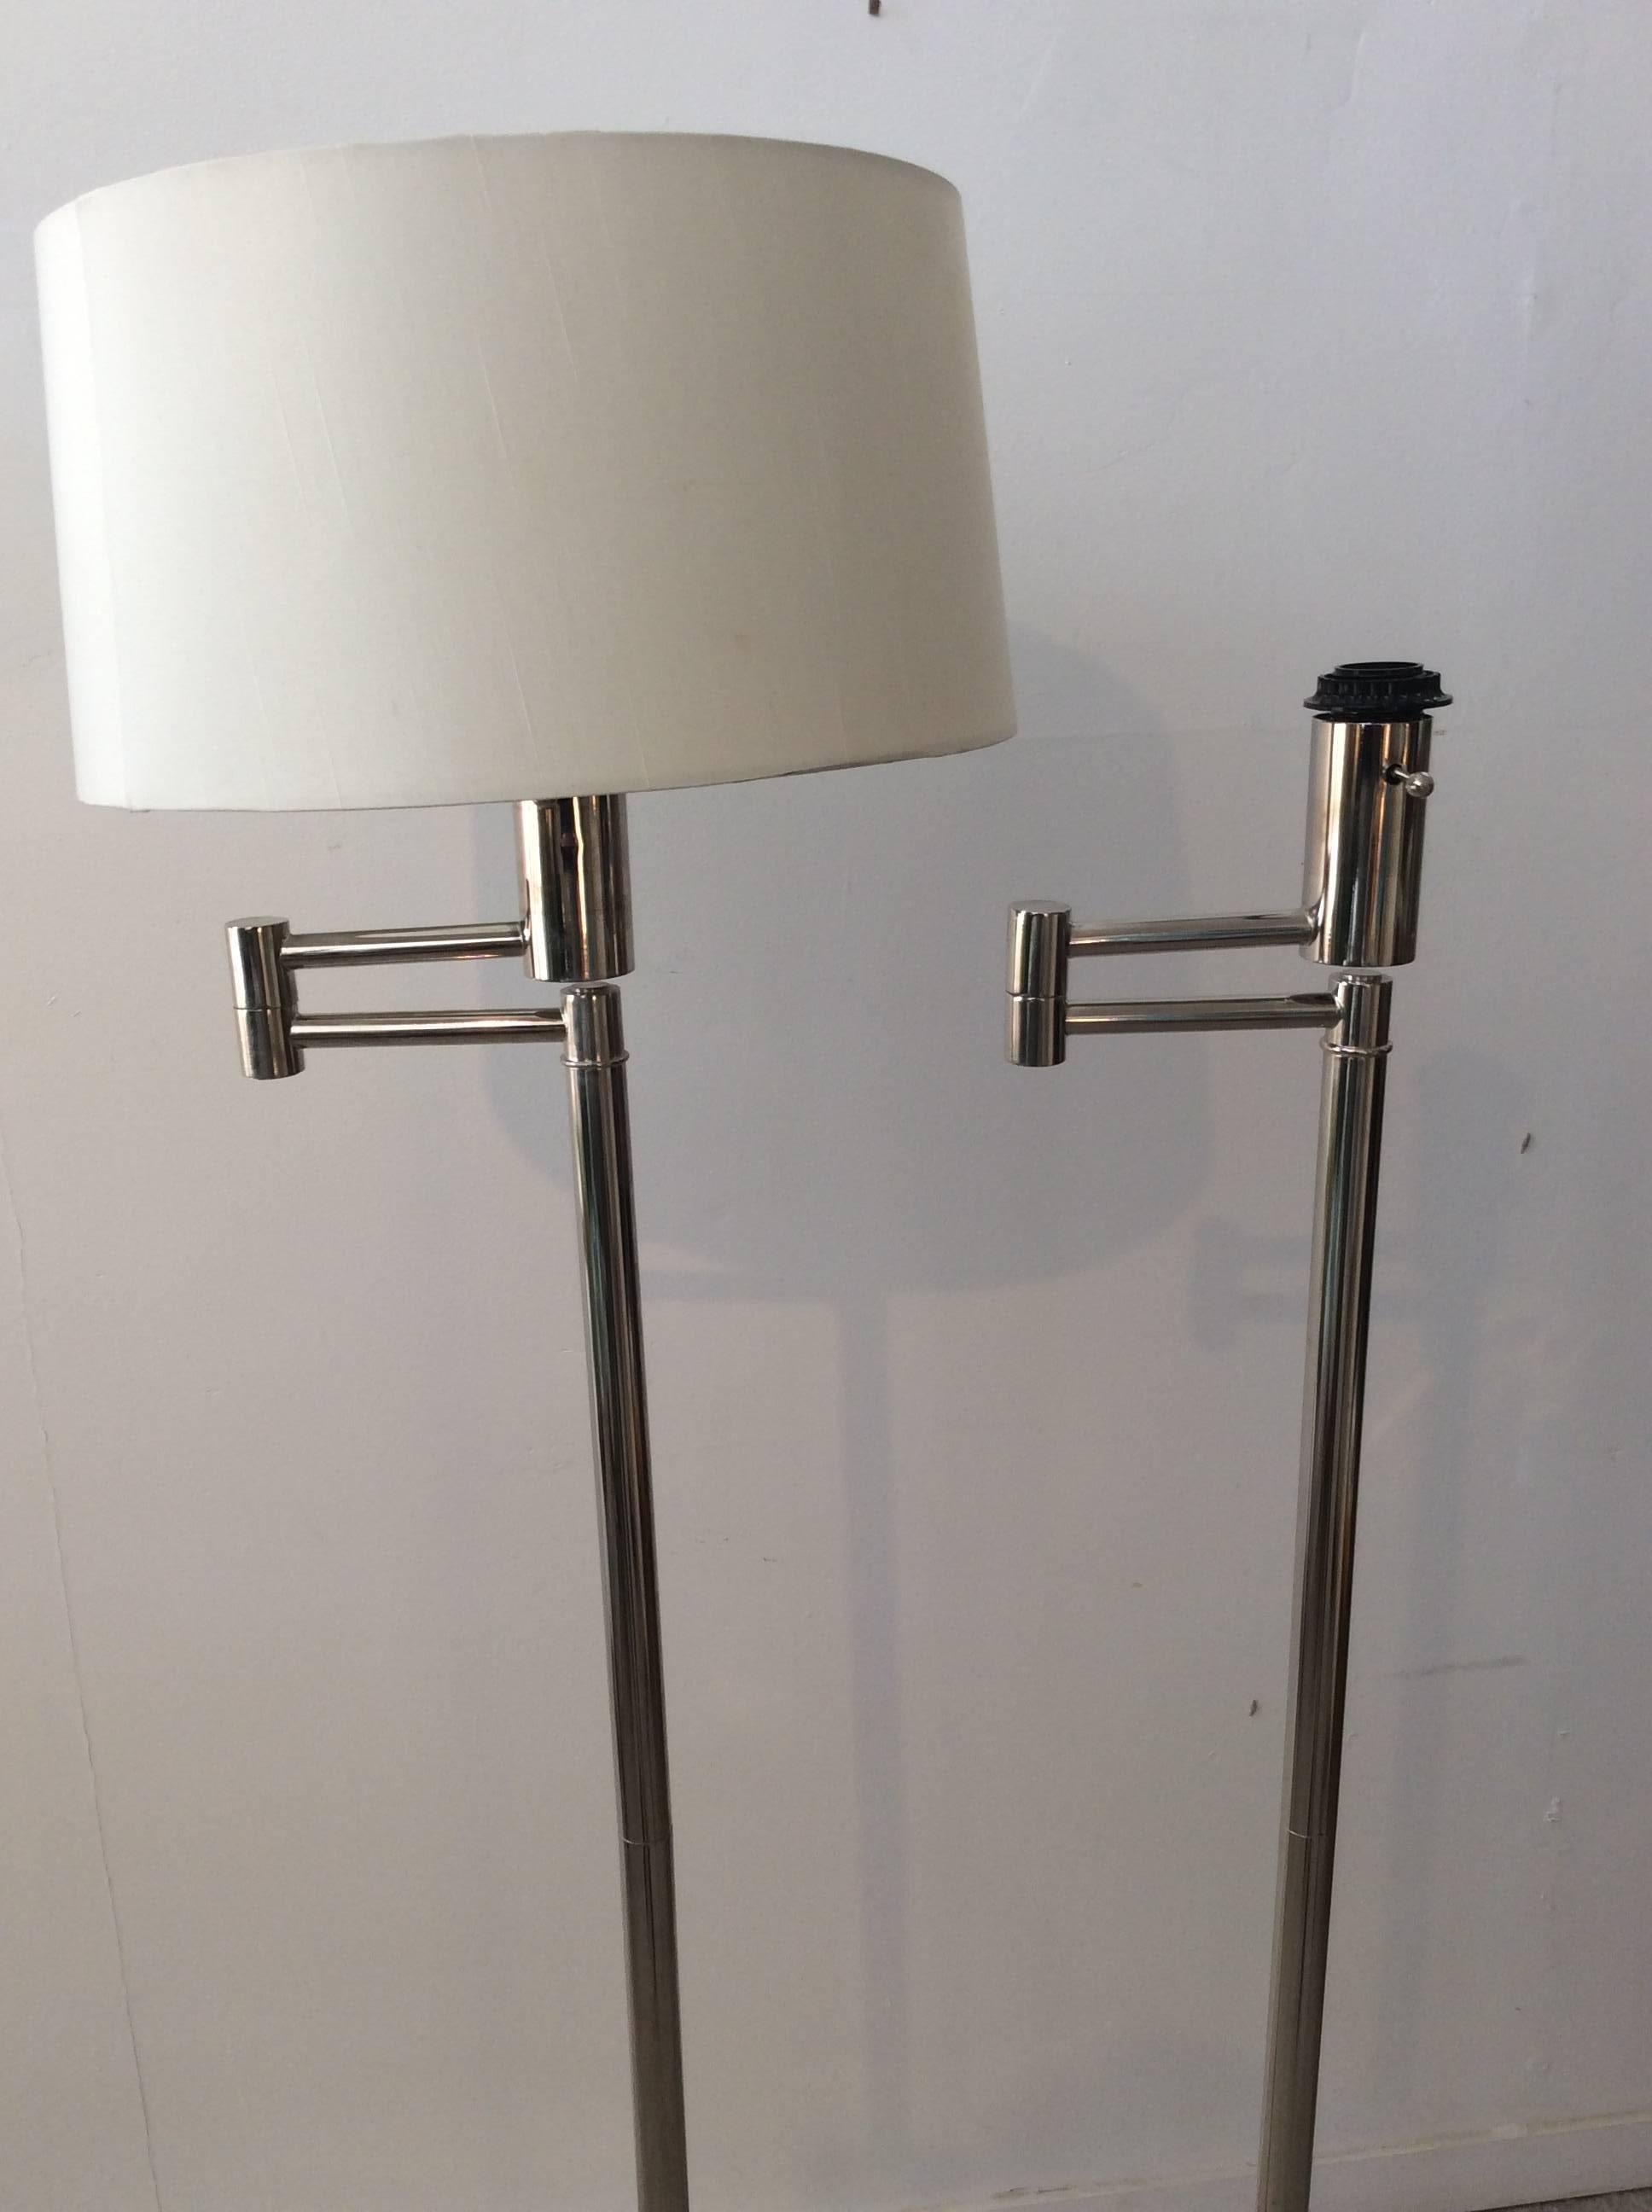 You are looking at a pair of Ralph Lauren swing arm chrome floor lamps. These lamps are newer. Don't know when they were manufactured but the style is definitely Mid-Century Modern. The chrome is in good shape with light wear. The electrical is in